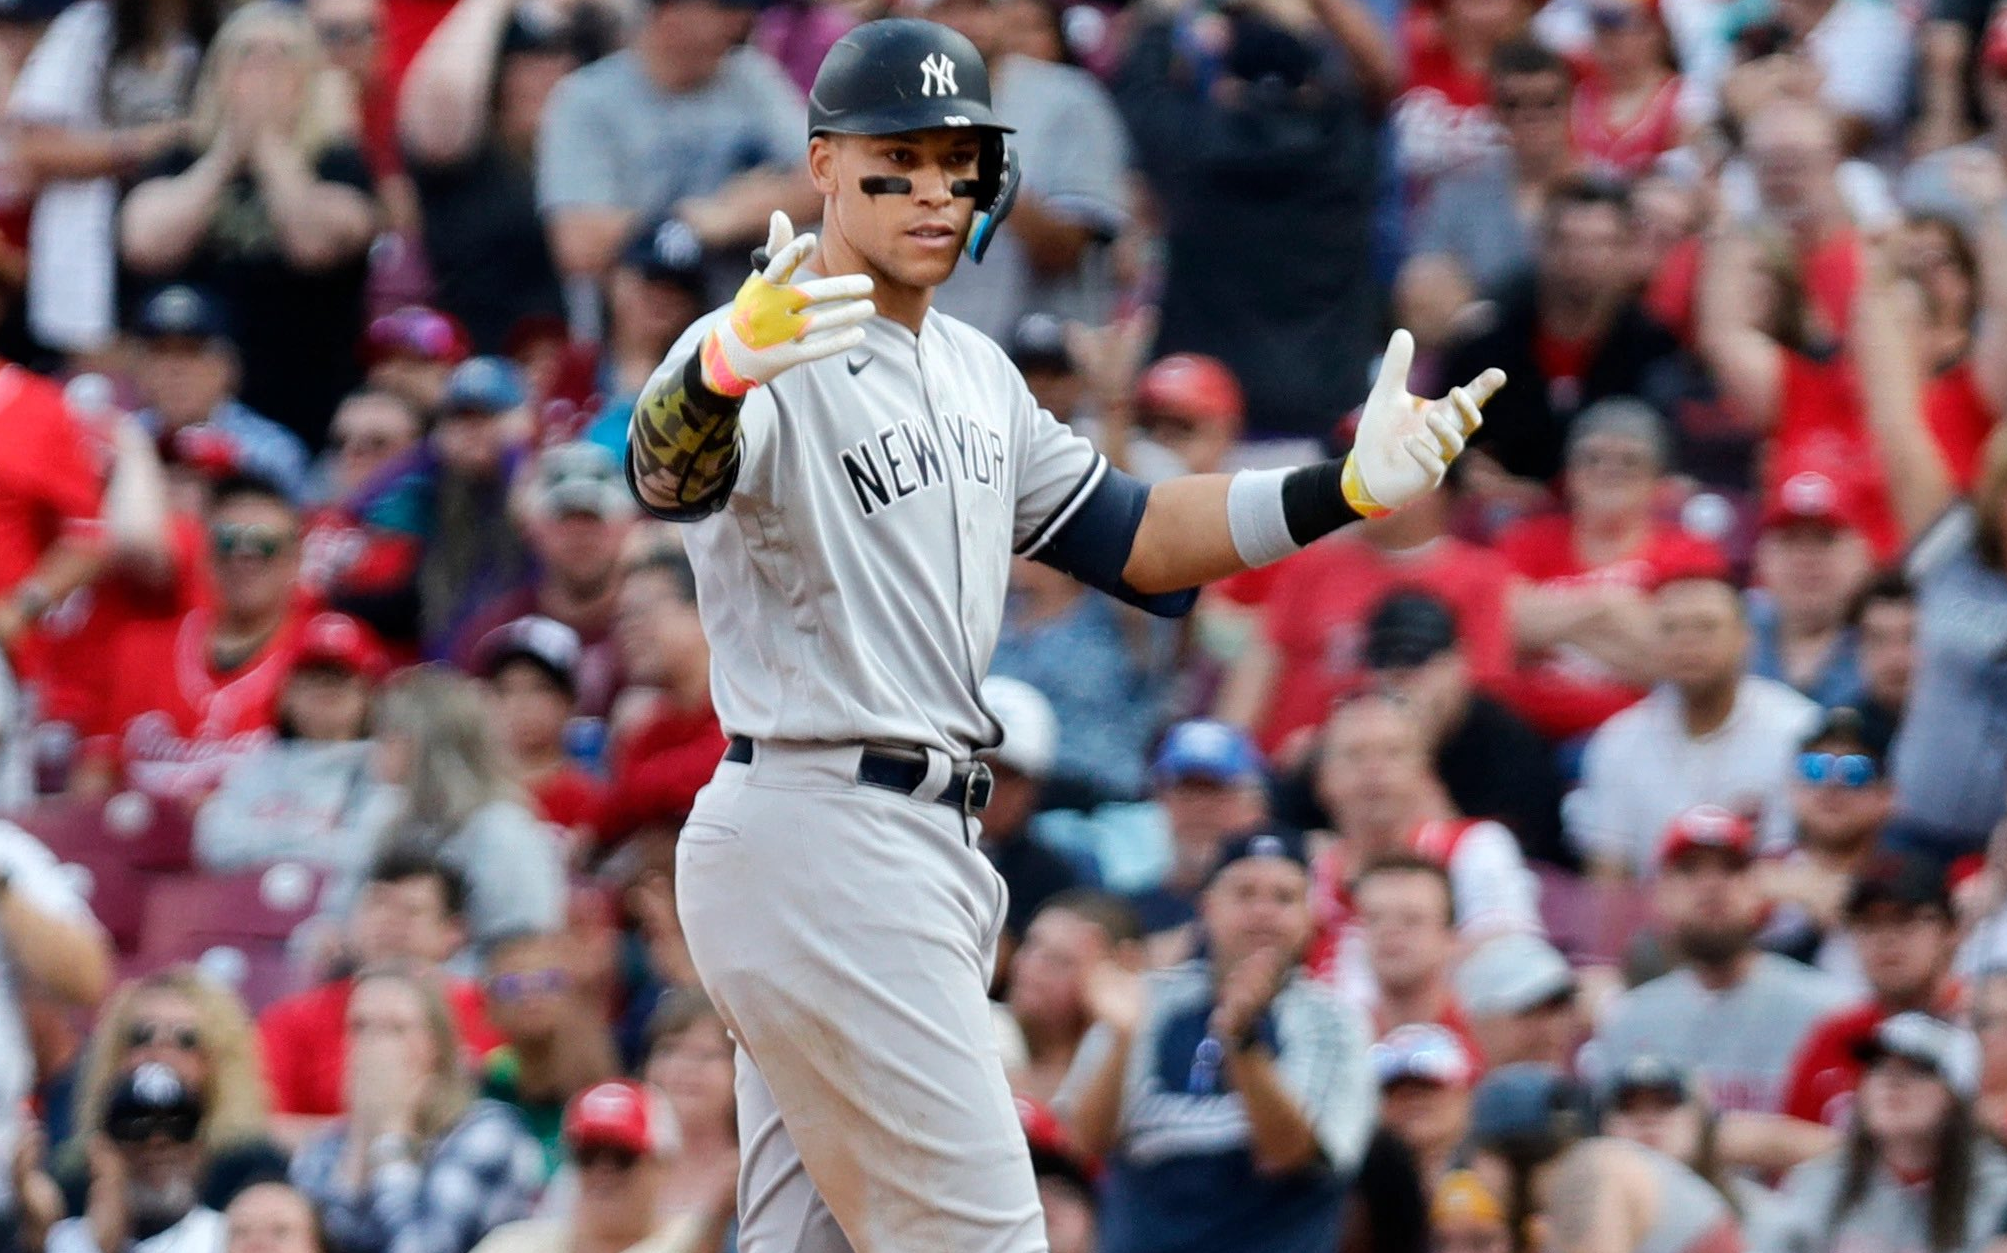 Aaron Judge has a homer in his 2nd game back to help the Yankees